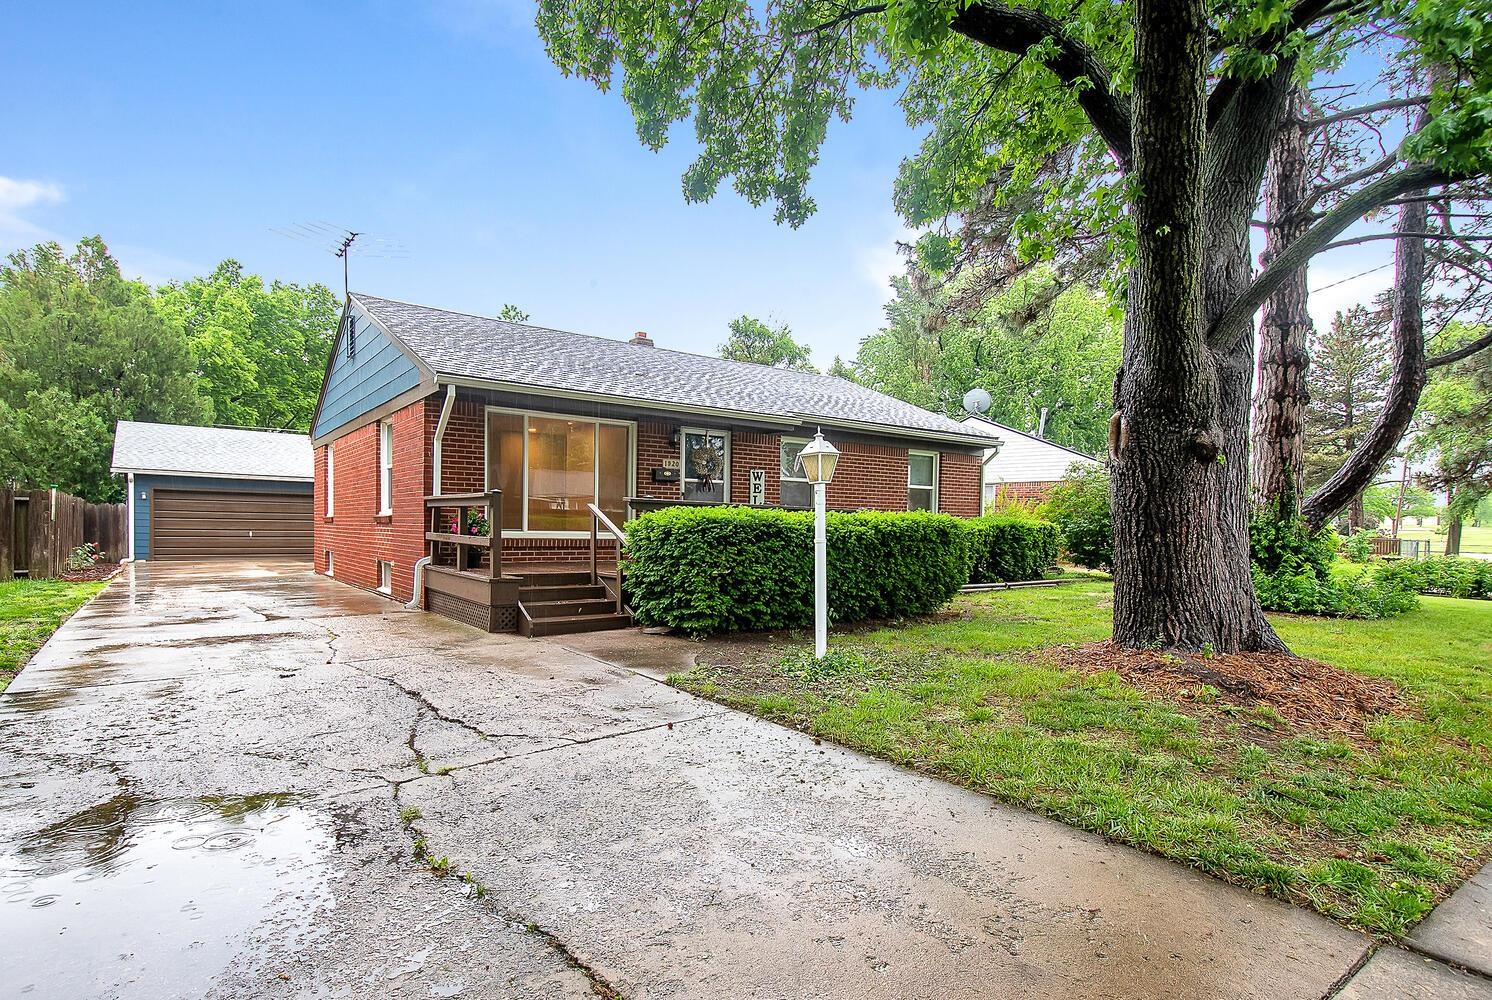 Immaculately maintained and lovingly updated brick ranch located near Cessna Park in Wichita! Origin